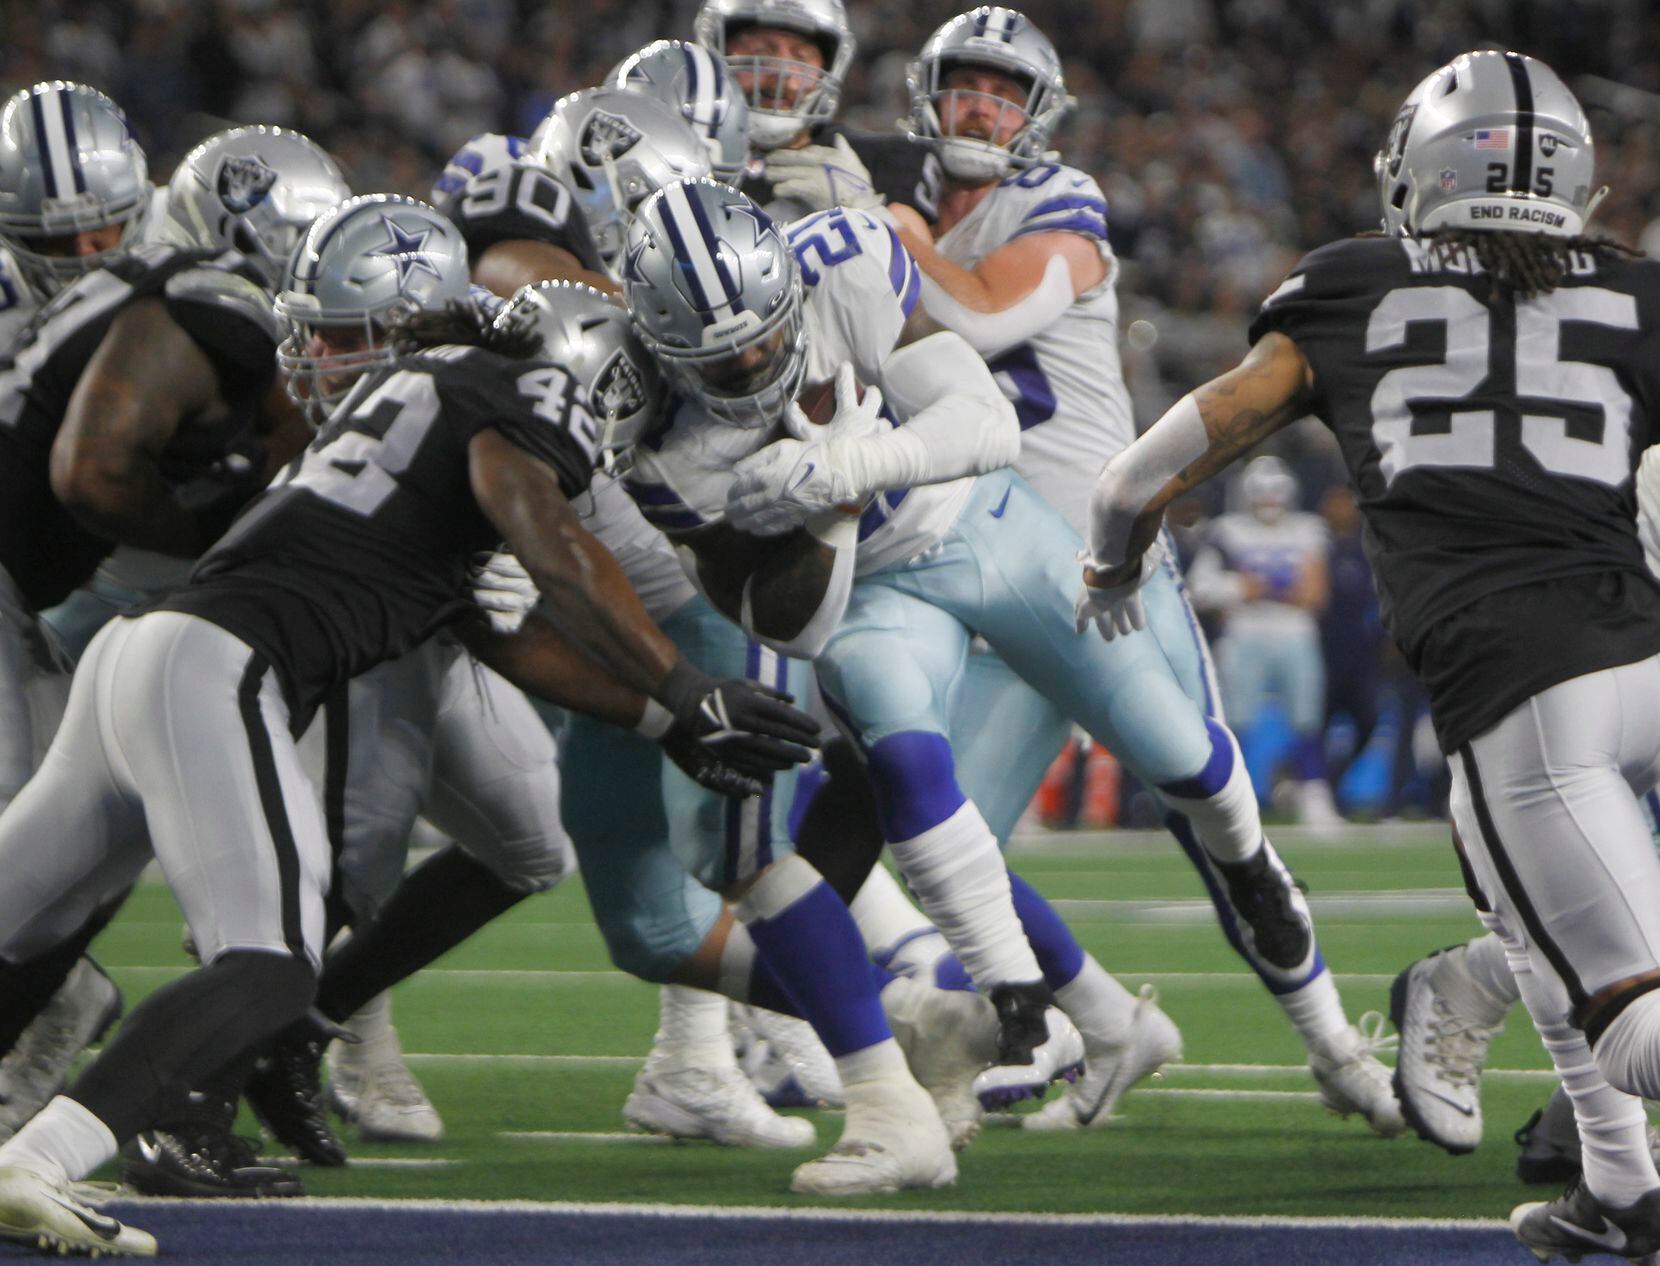 Dallas Cowboys running back Ezekiel Elliott (21), powers his way past Las Vegas Raiders outside linebacker Cory Littleton (42) into the end zone for a 2nd quarter rushing touchdown. The two NFL teams played their Thanksgiving Day game at AT&T Stadium in Arlington on November 25, 2021. (Steve Hamm/ Special Contributor)